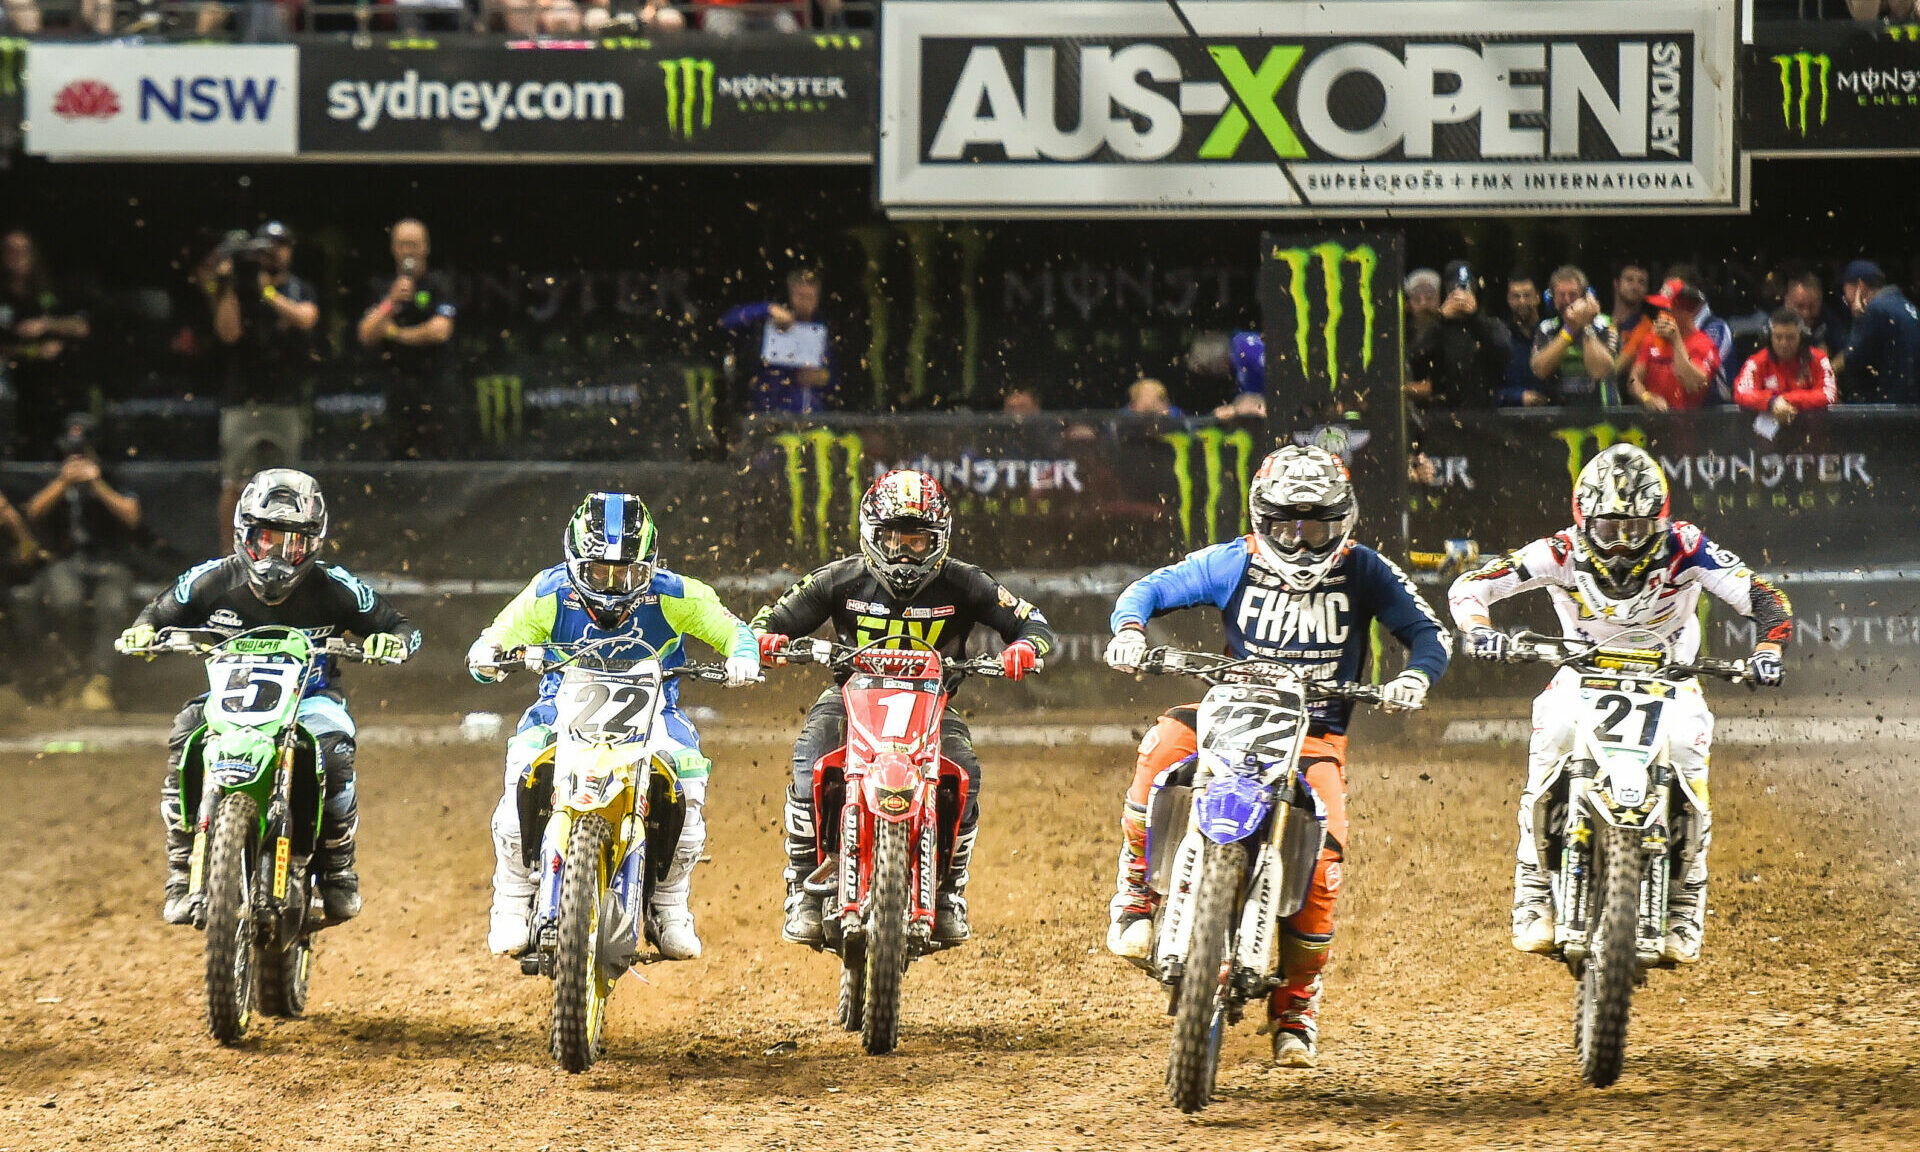 Action from an AUS-X Open Supercross event in Sydney, Australia. Photo courtesy SX Global.